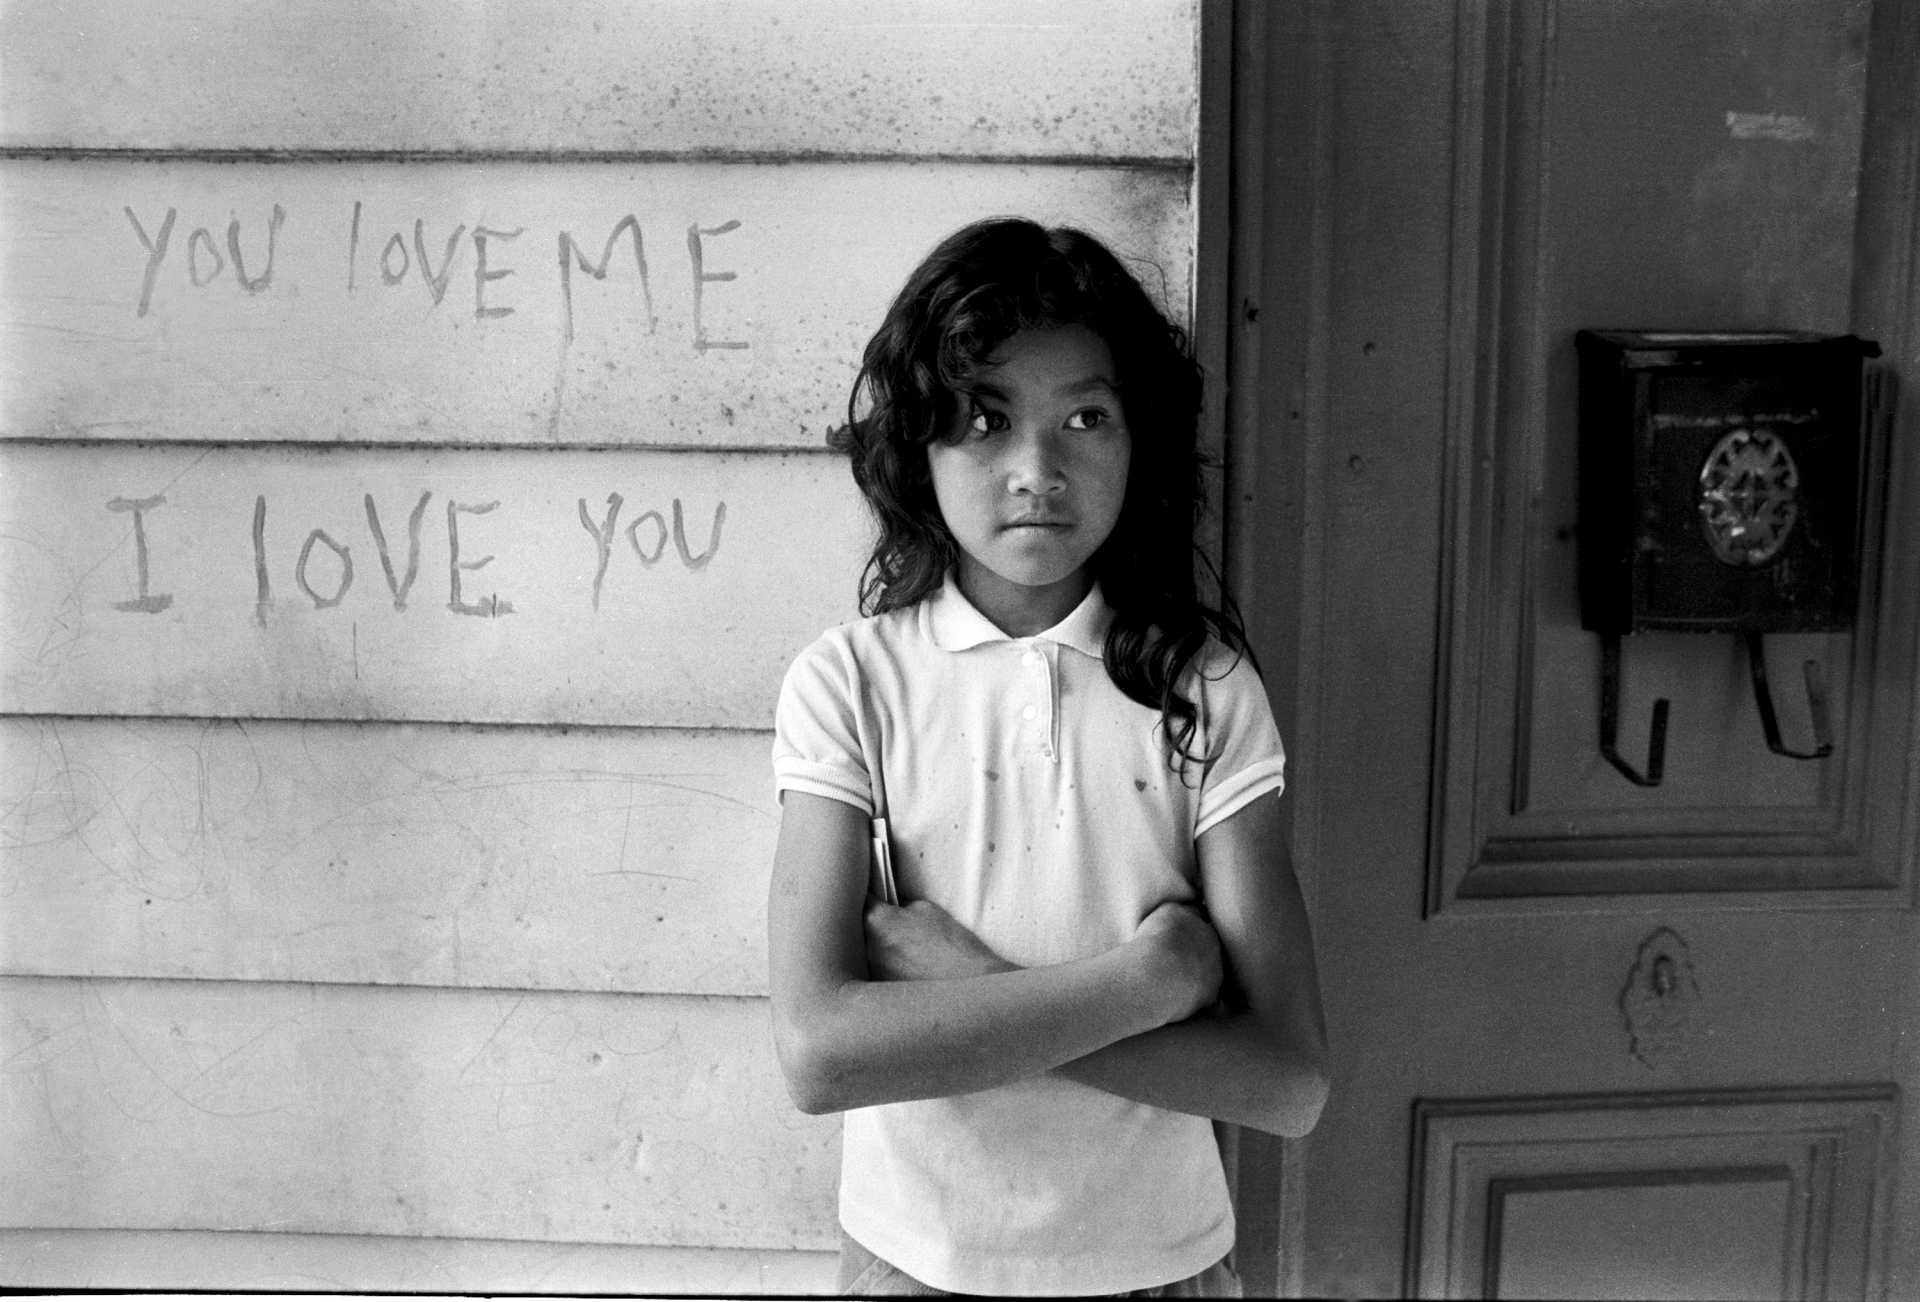 A message of love. 1984